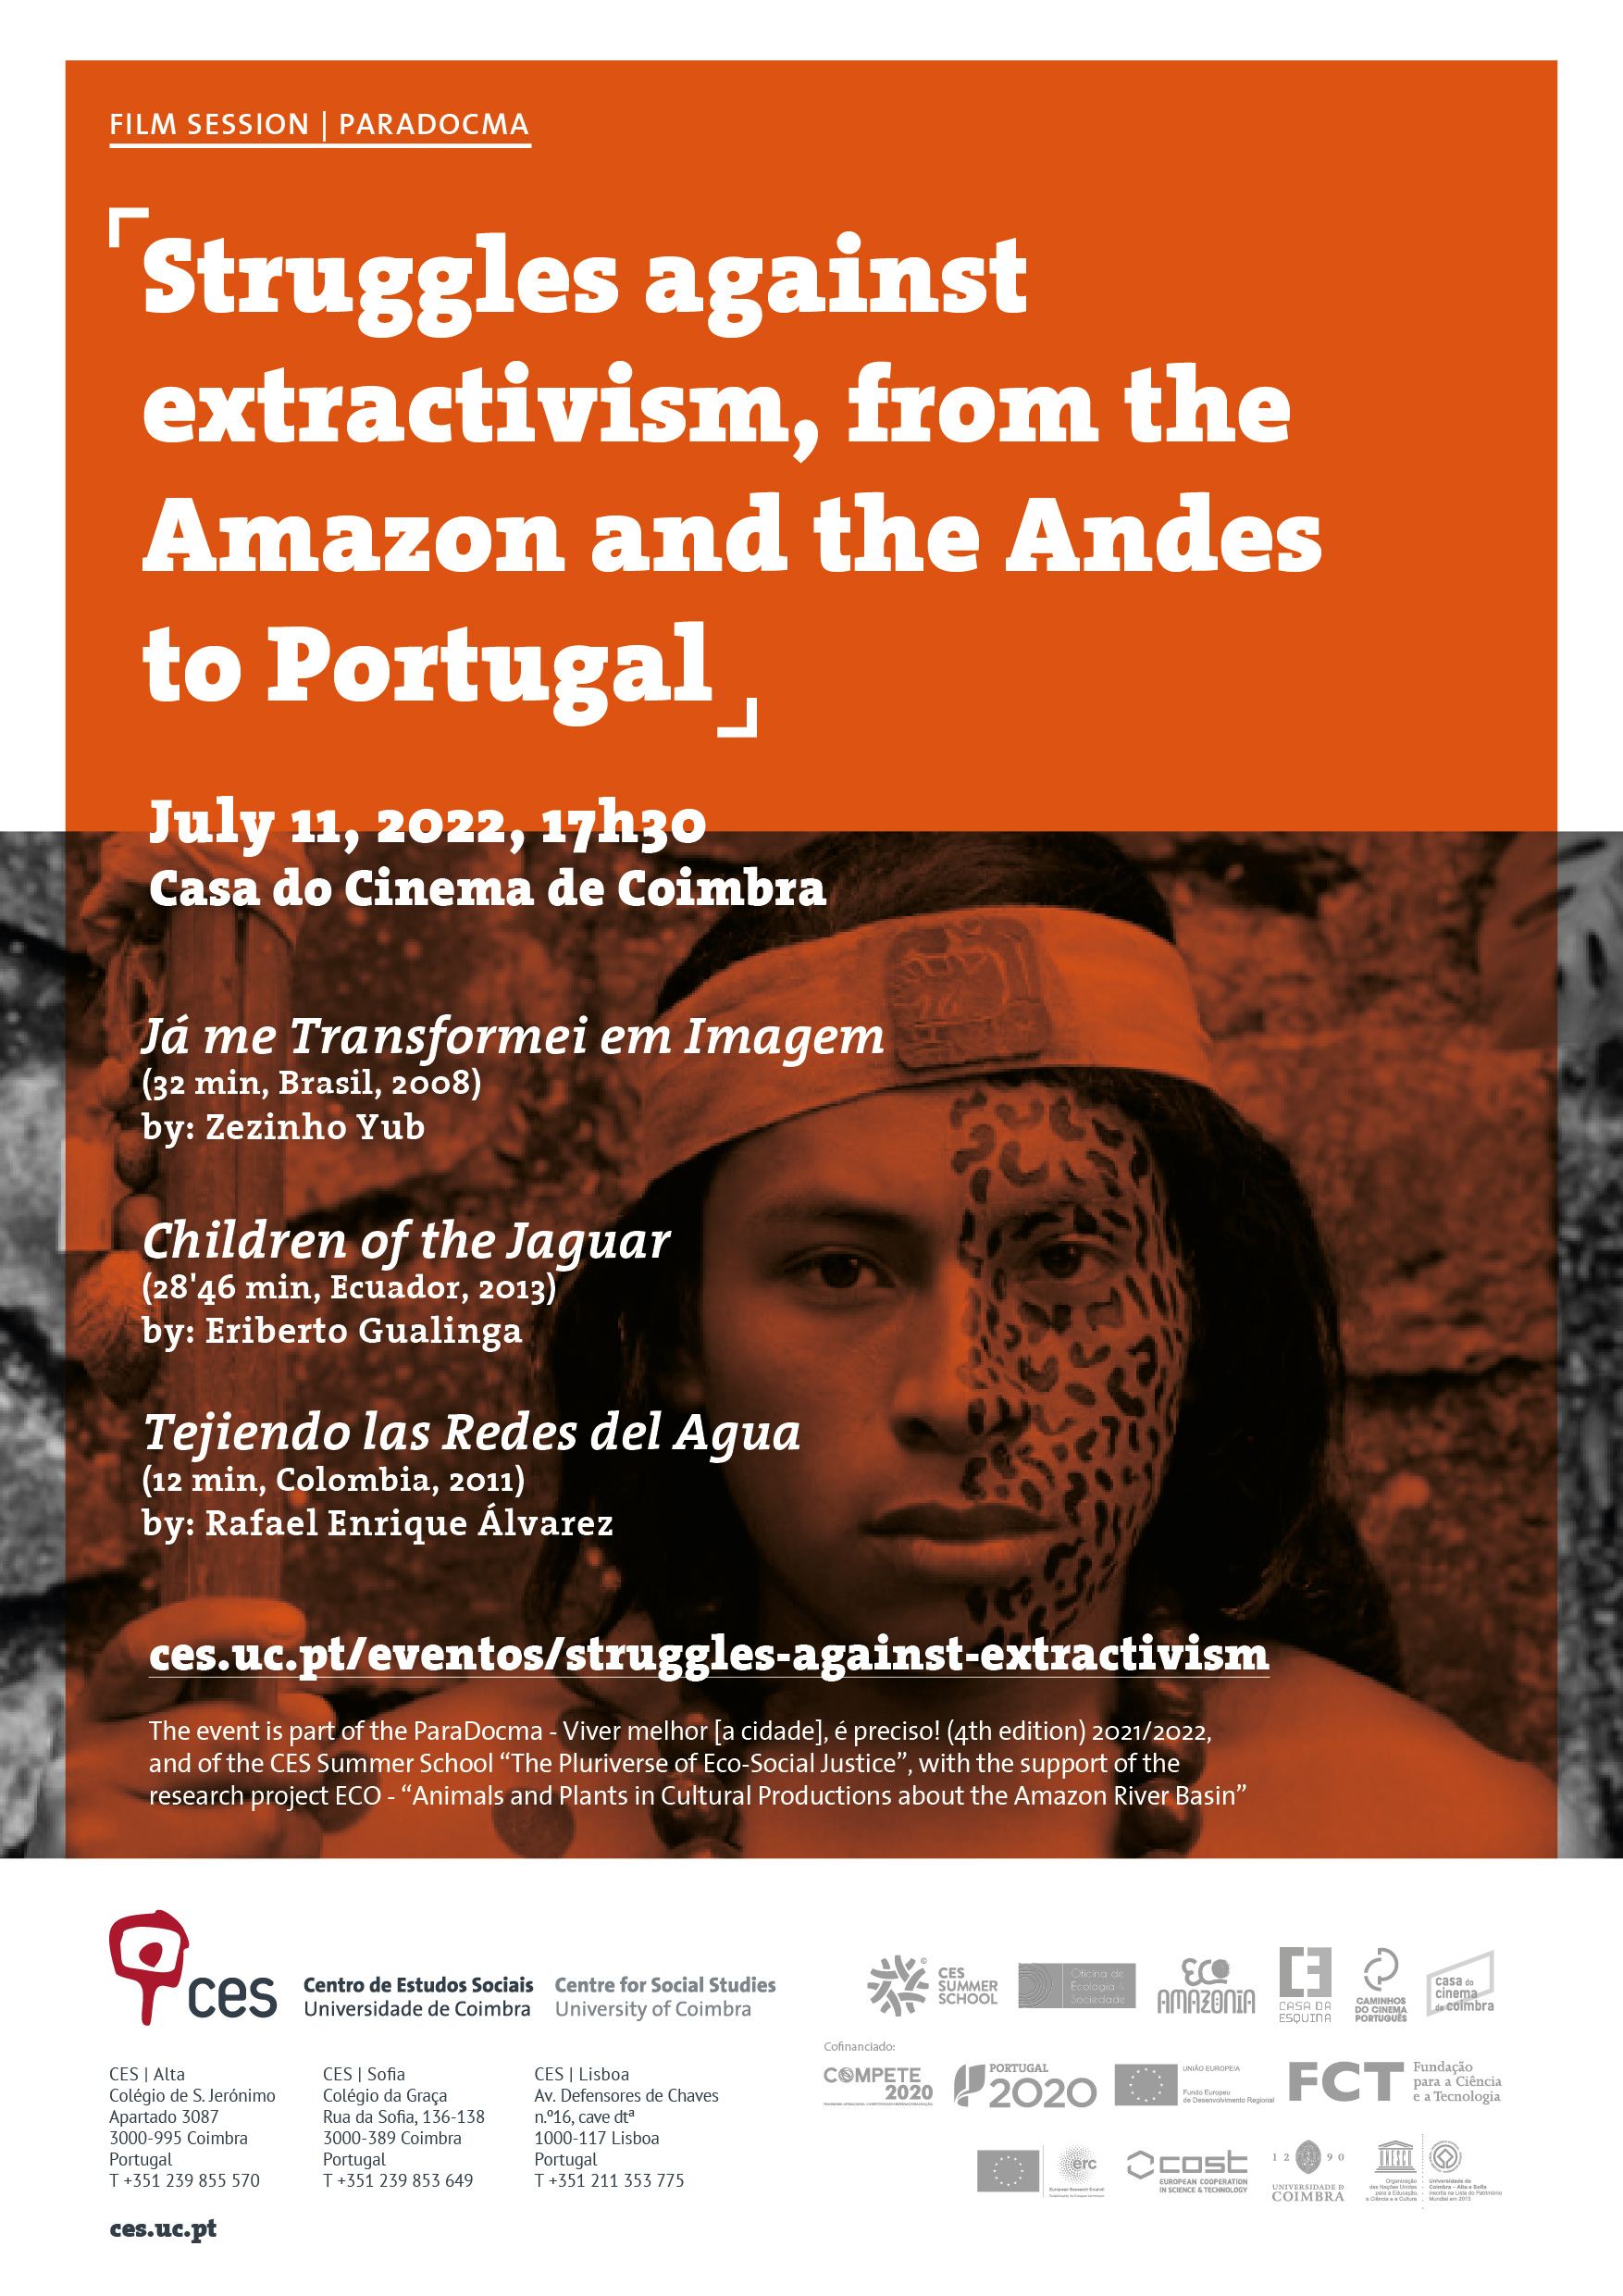 Struggles against extractivism, from the Amazon and the Andes to Portugal<span id="edit_39472"><script>$(function() { $('#edit_39472').load( "/myces/user/editobj.php?tipo=evento&id=39472" ); });</script></span>